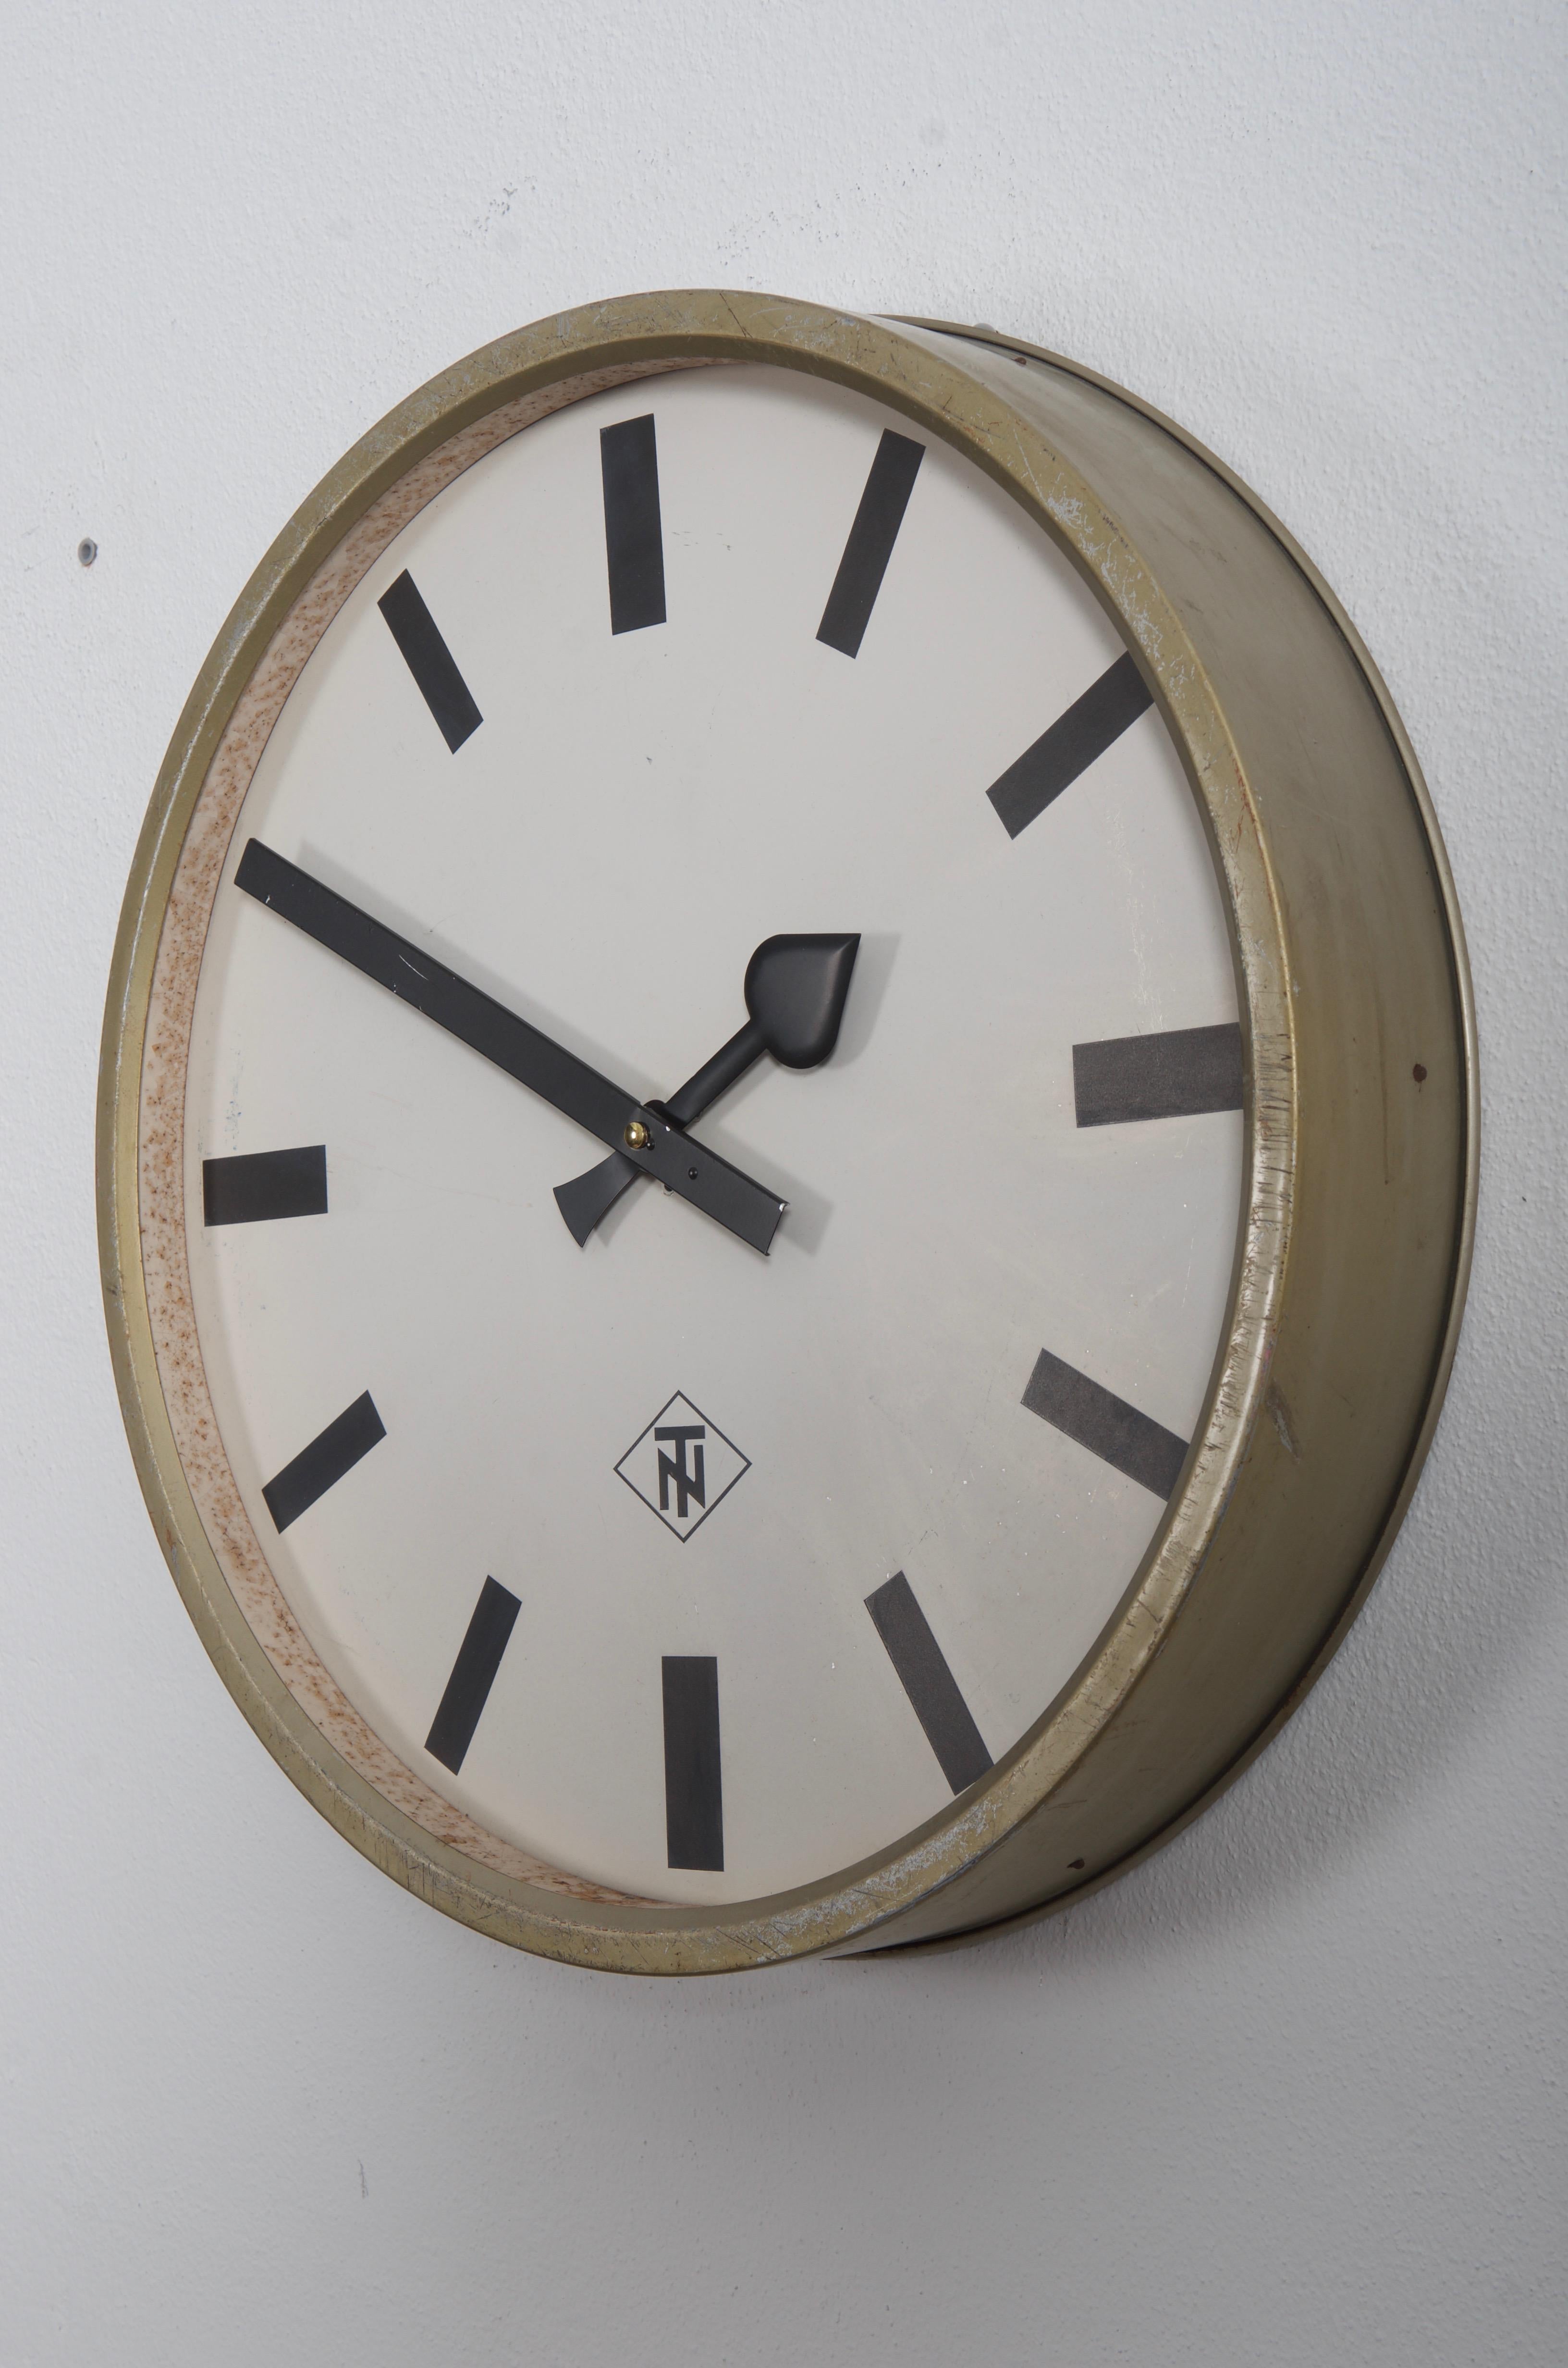 Painted Large Industrial Factory or Stration Clock by Telefonbau Und Normalzeit